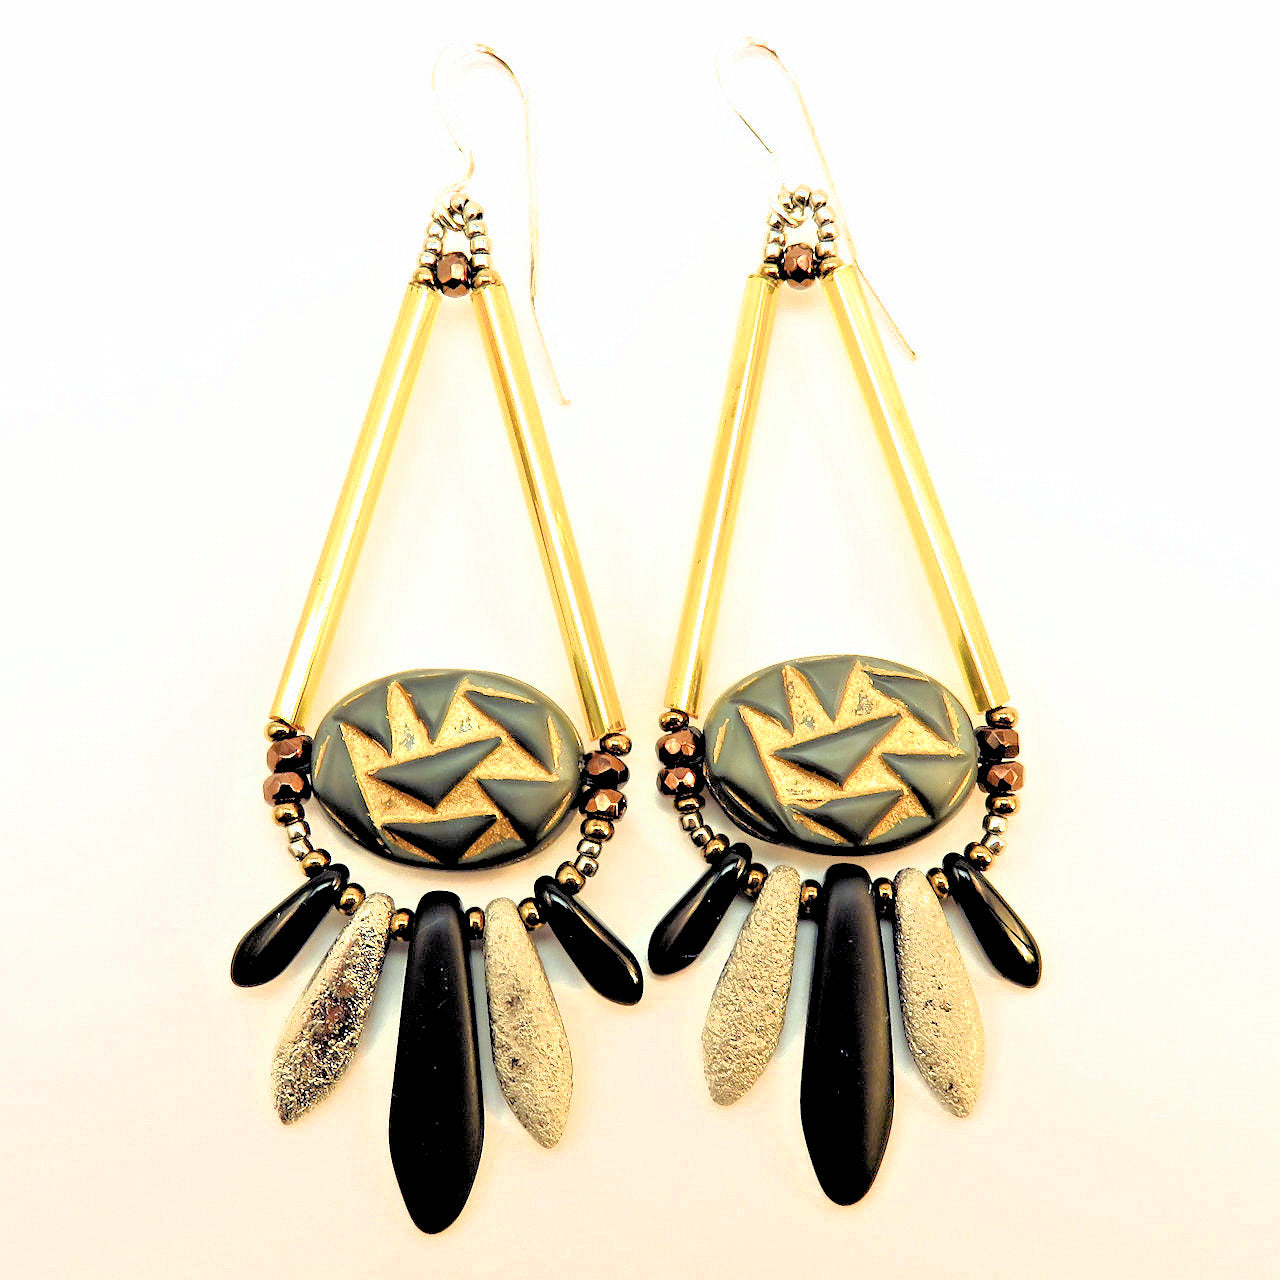 Teardrop shaped earrings in gold, silver, bronze and black lay on a white background. The earrings are an open teardrop shape, with the wide part filled by silvery gray ovals with an abstract triangle design that is antiqued in gold. Below the teardrop are five dagger beads, small black on the outside, a textured silver inside, and a large matte black one in the center. 